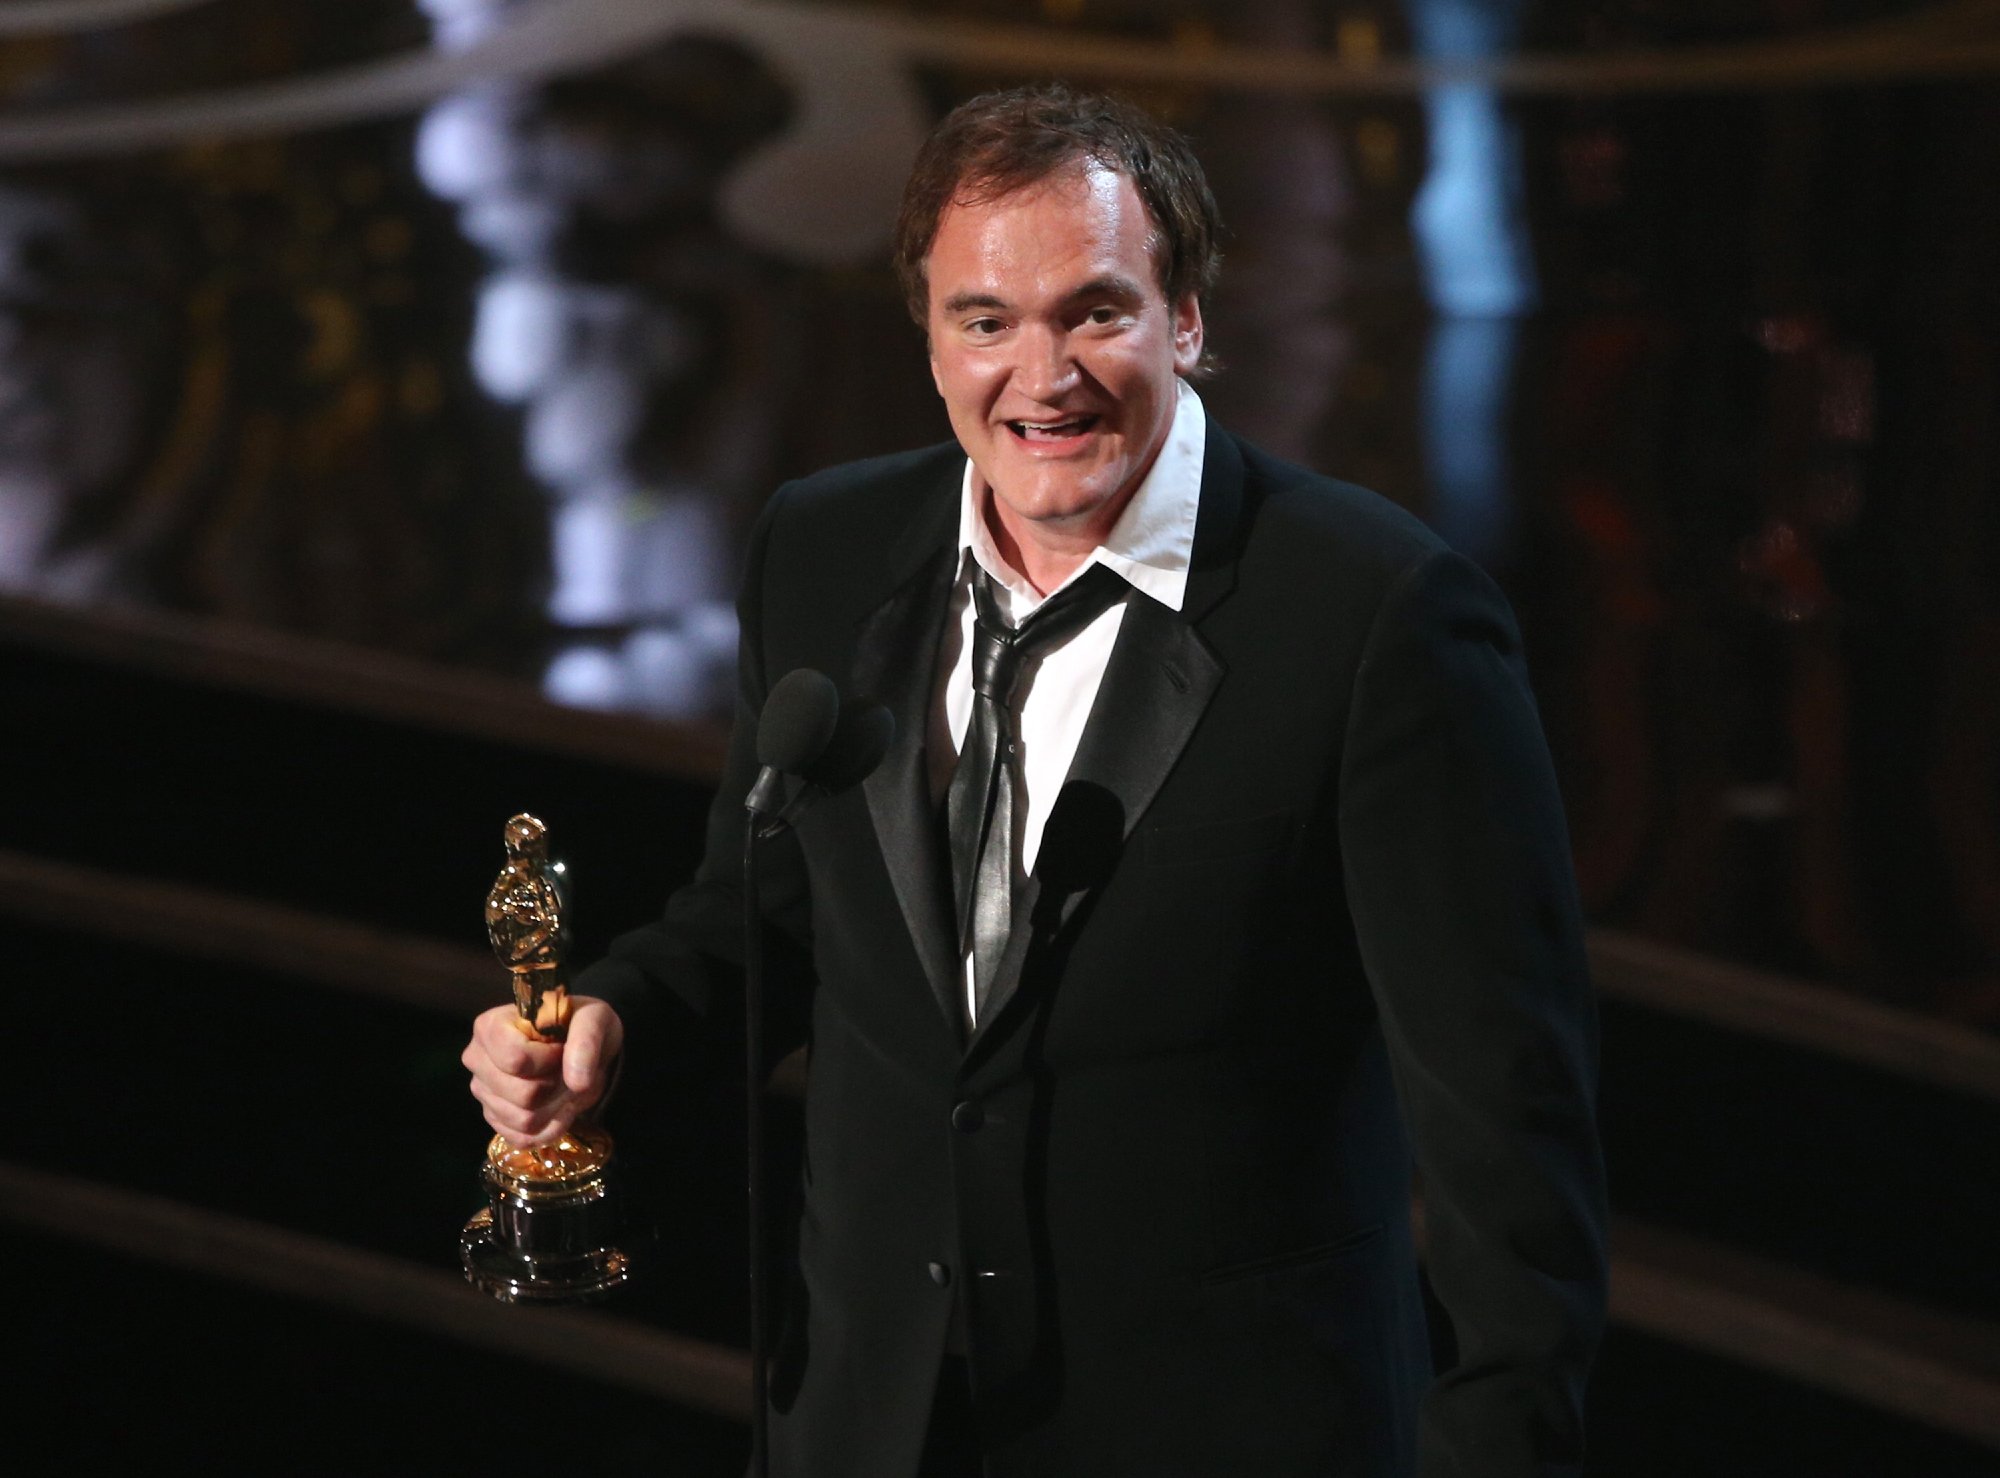 'Pulp Fiction' filmmaker Quentin Tarantino accepting the best writing Oscar for 'Django Unchained'